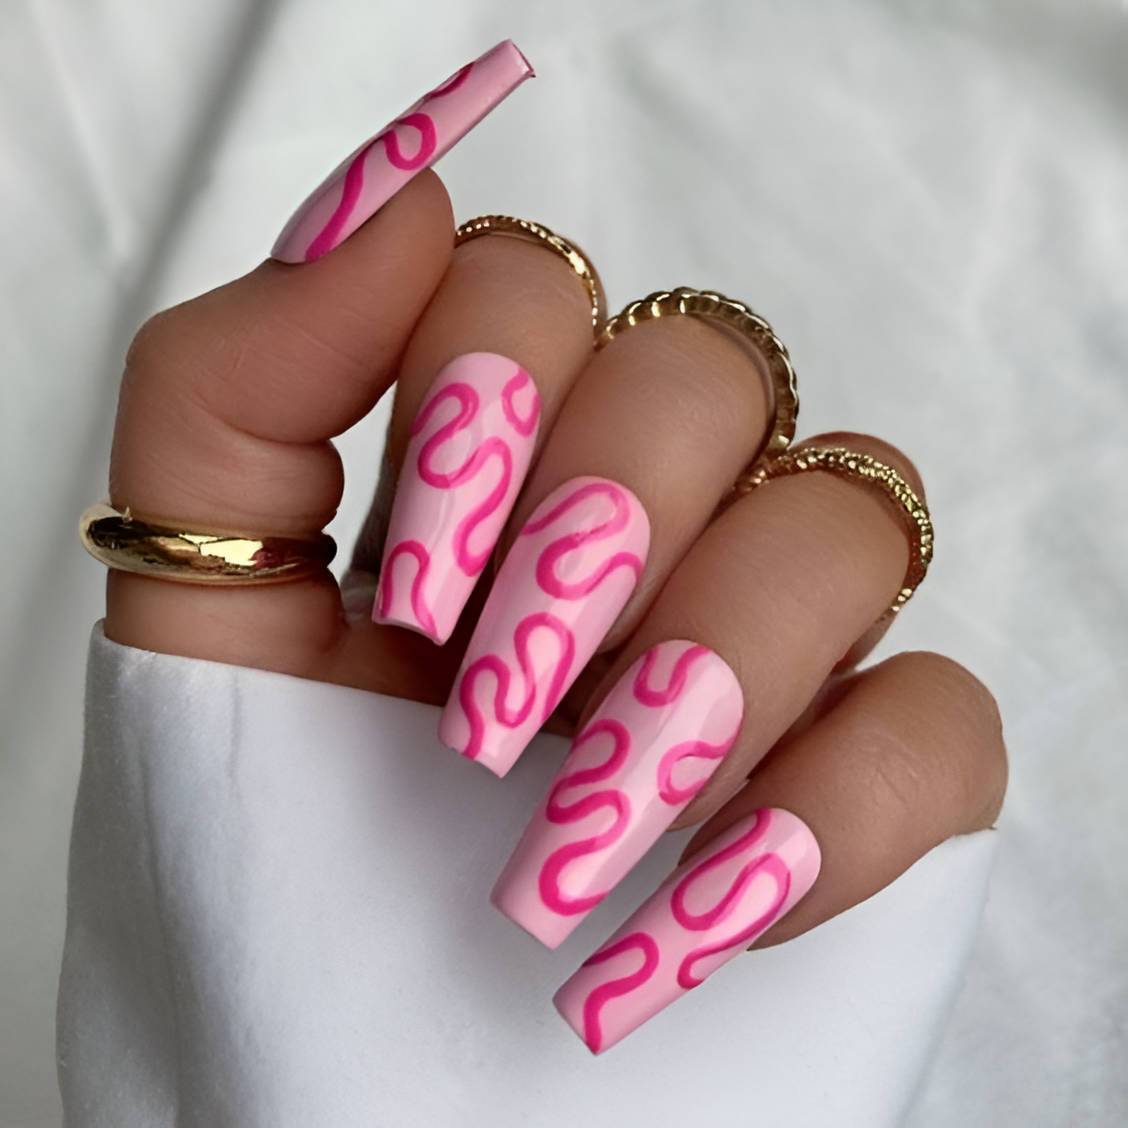 30 Fabulous Swirl Nail Designs So Easy To Copy - 199